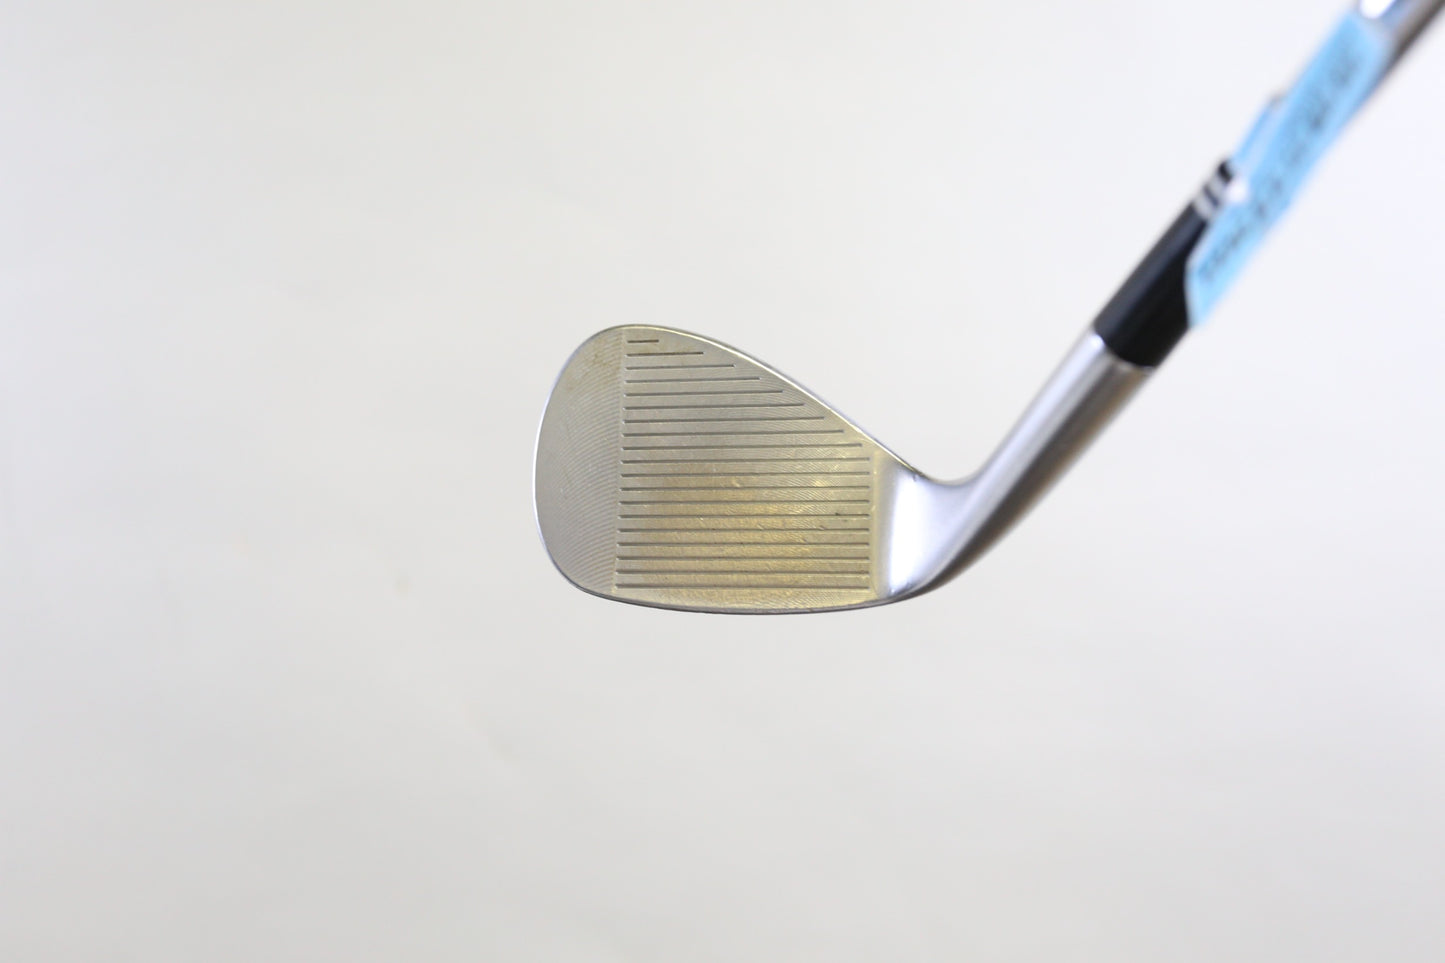 Used Cleveland RTX ZipCore Tour Satin Mid Lob Wedge - Right-Handed - 58 Degrees - Extra Stiff Flex